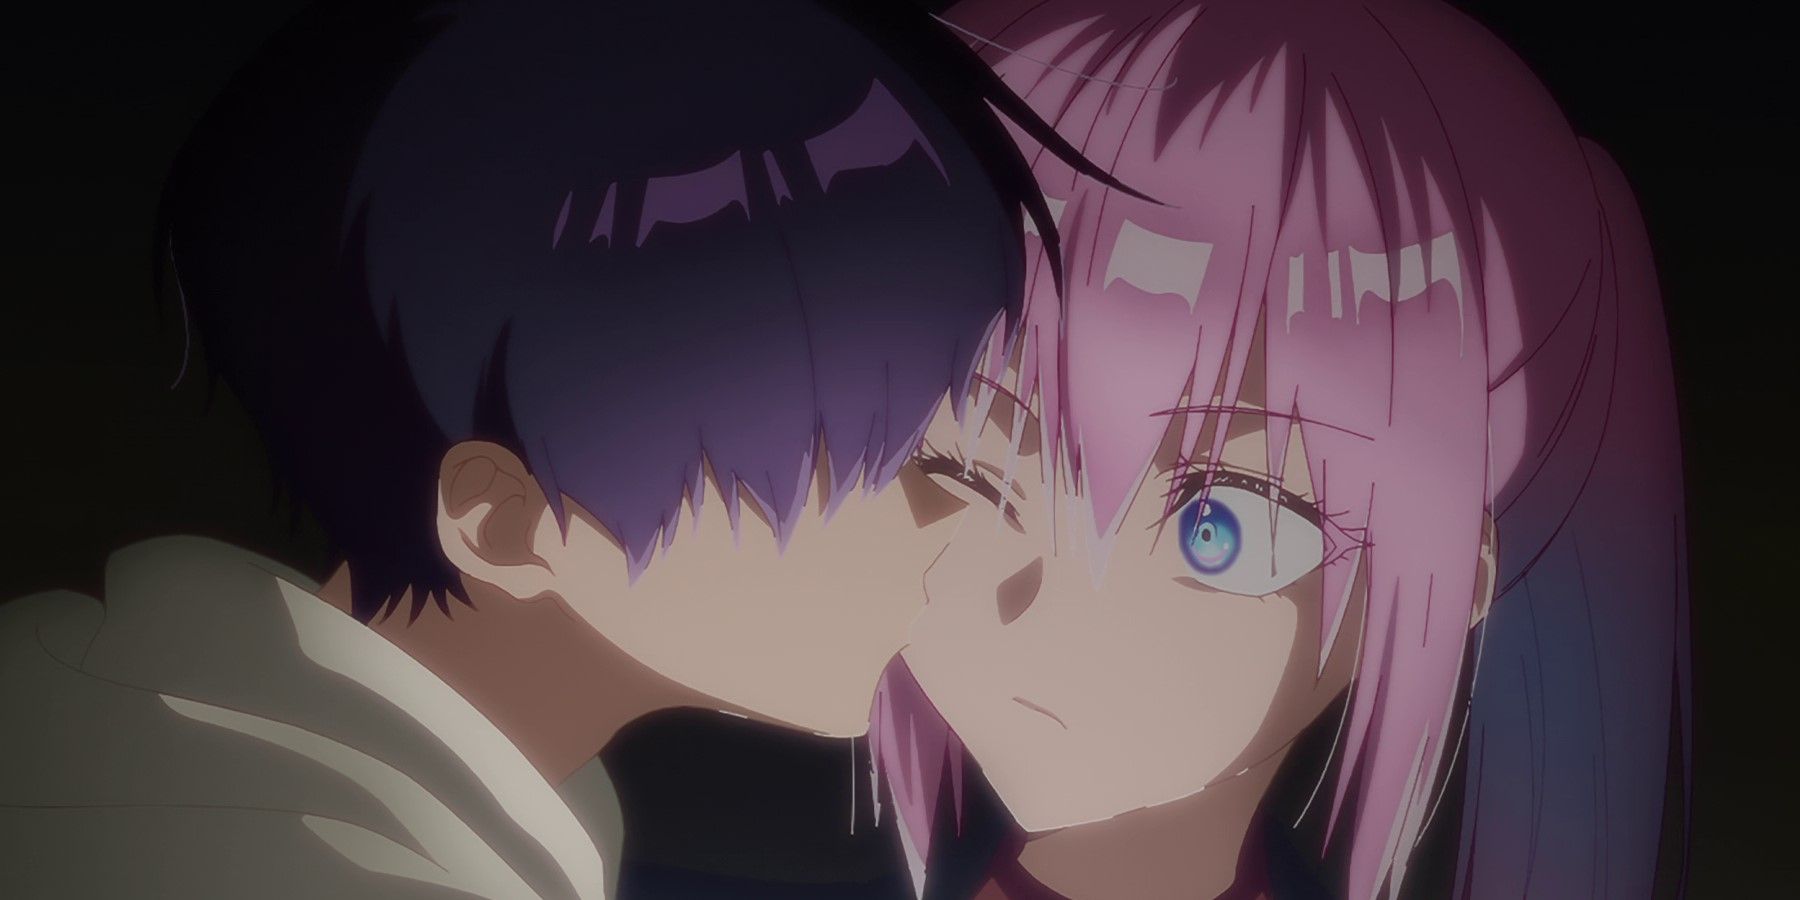 Shikimori's Not Just A Cutie Episode 10 Review - But Why Tho?